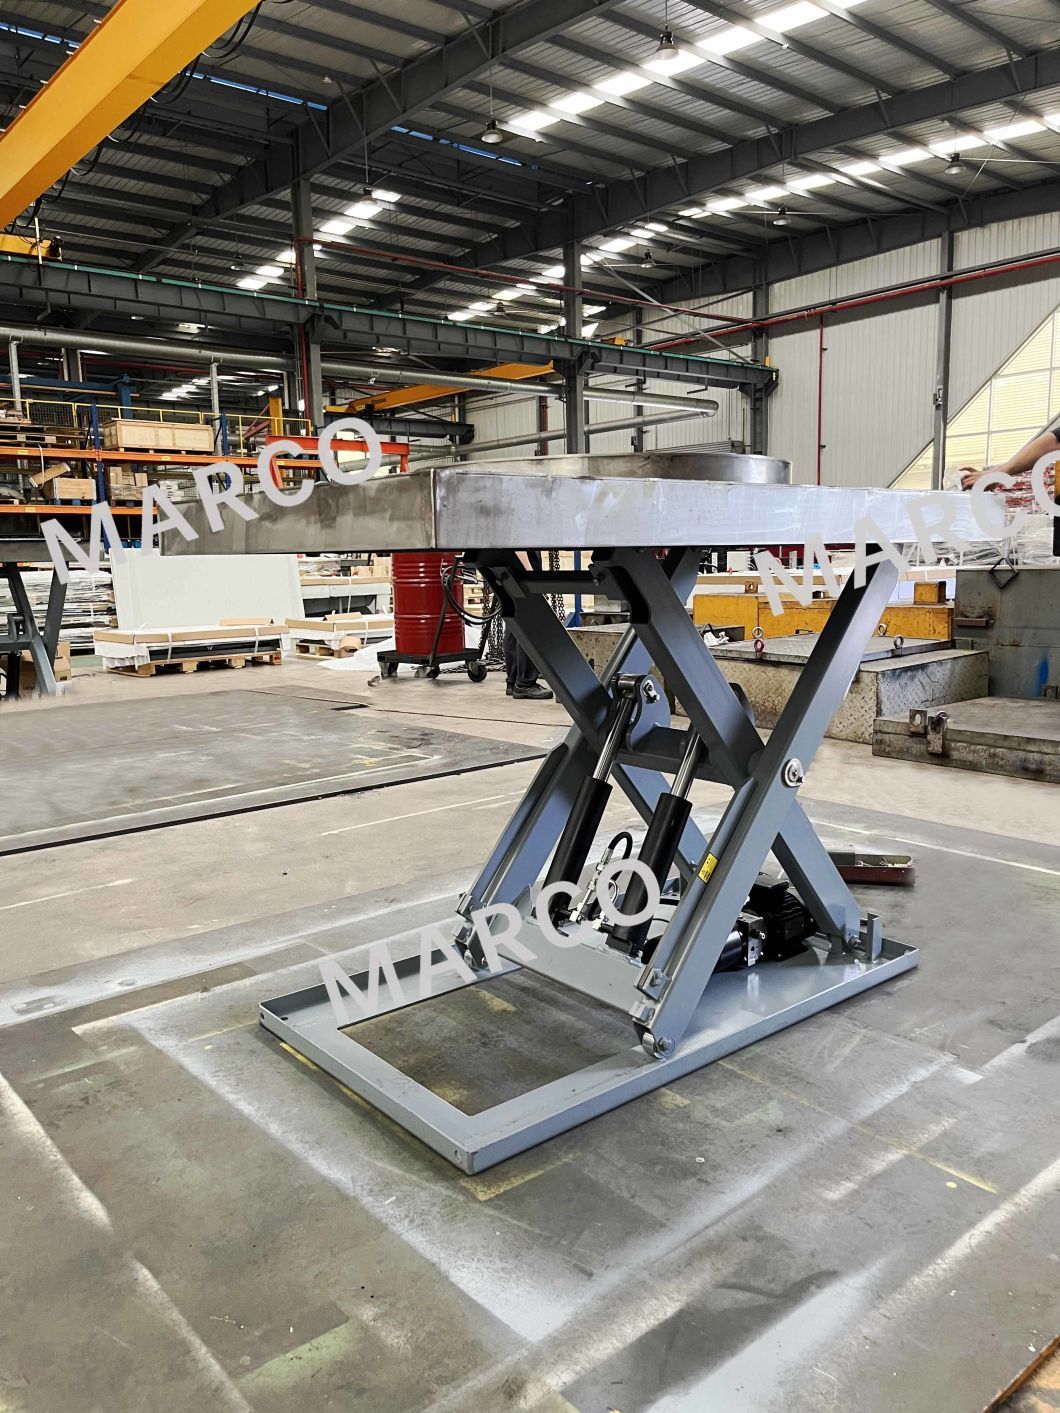 Stationary Electric Single Scissor Lift Table with Turntable